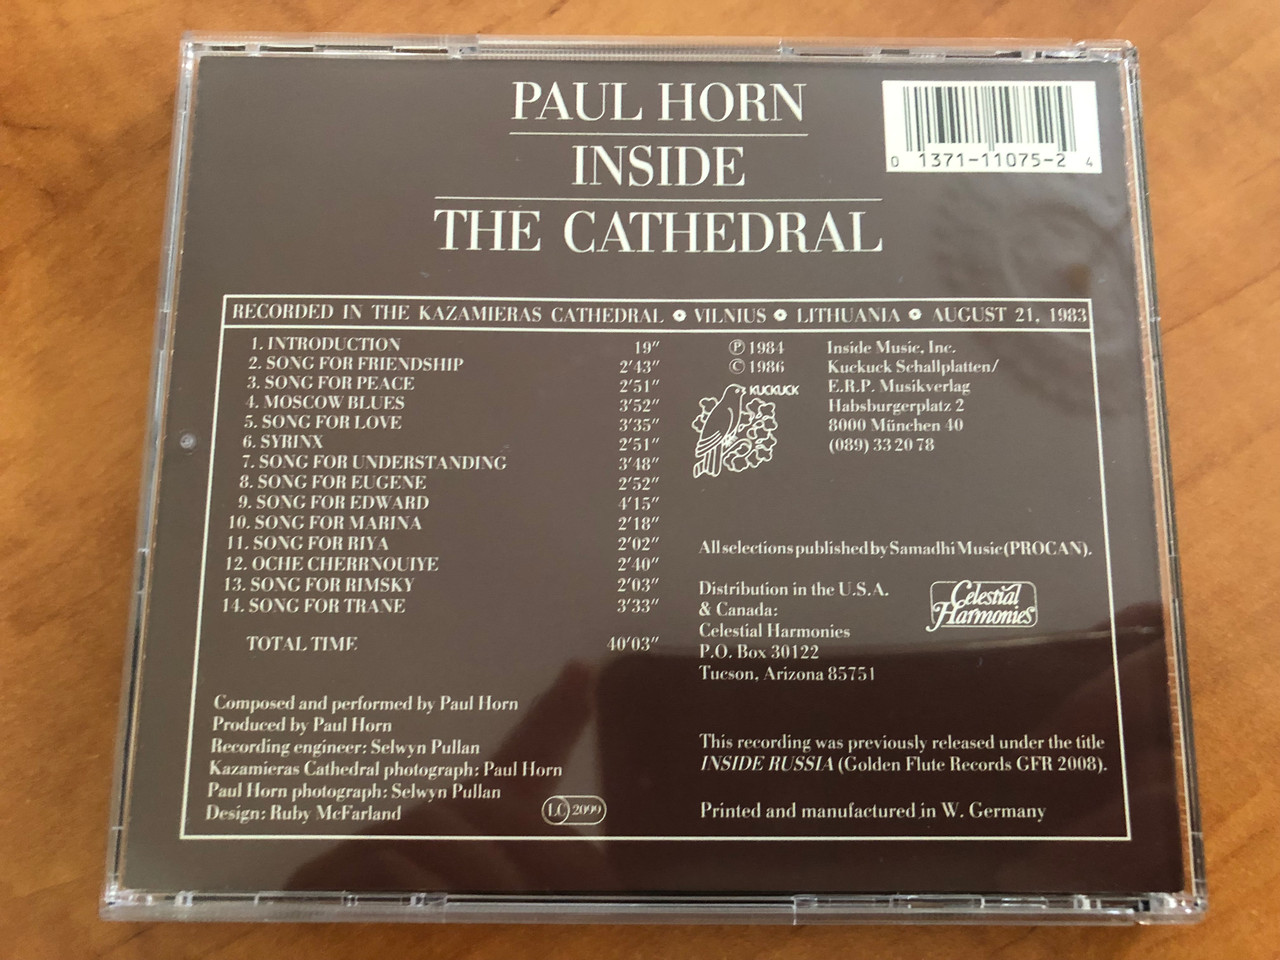 https://cdn10.bigcommerce.com/s-62bdpkt7pb/products/30798/images/181827/Paul_Horn_Inside_The_Cathedral_Recorded_In_The_Kazamieras_Cathedral_Vilnius_Lithuania_August_21_1983_Kuckuck_Audio_CD_1986_11075-2_4__57338.1623931884.1280.1280.JPG?c=2